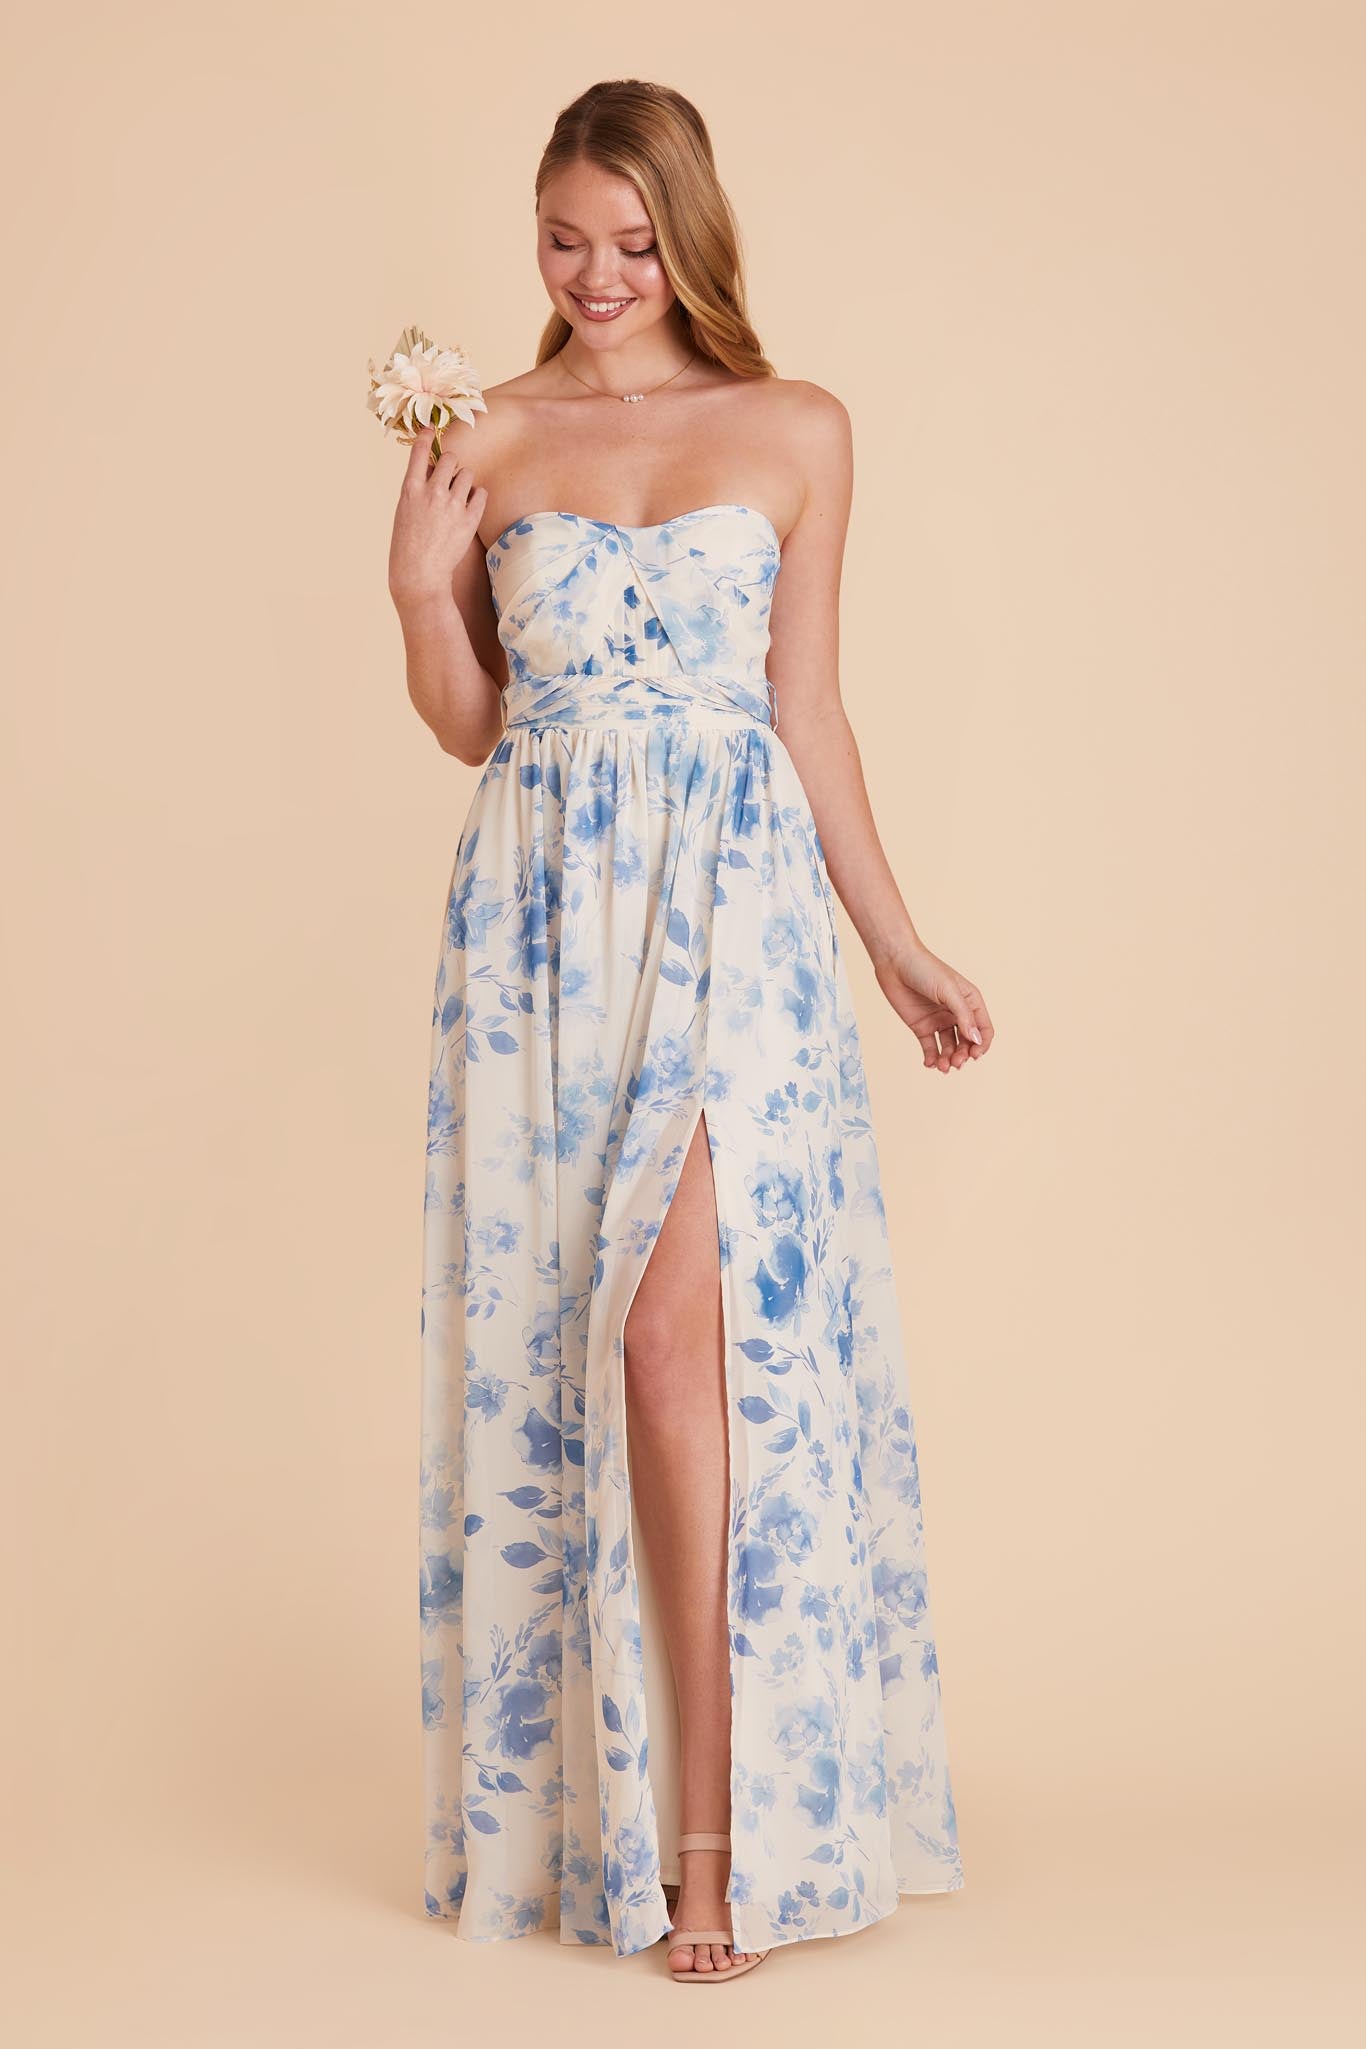 Blue Rococo Floral Grace Convertible Dress by Birdy Grey